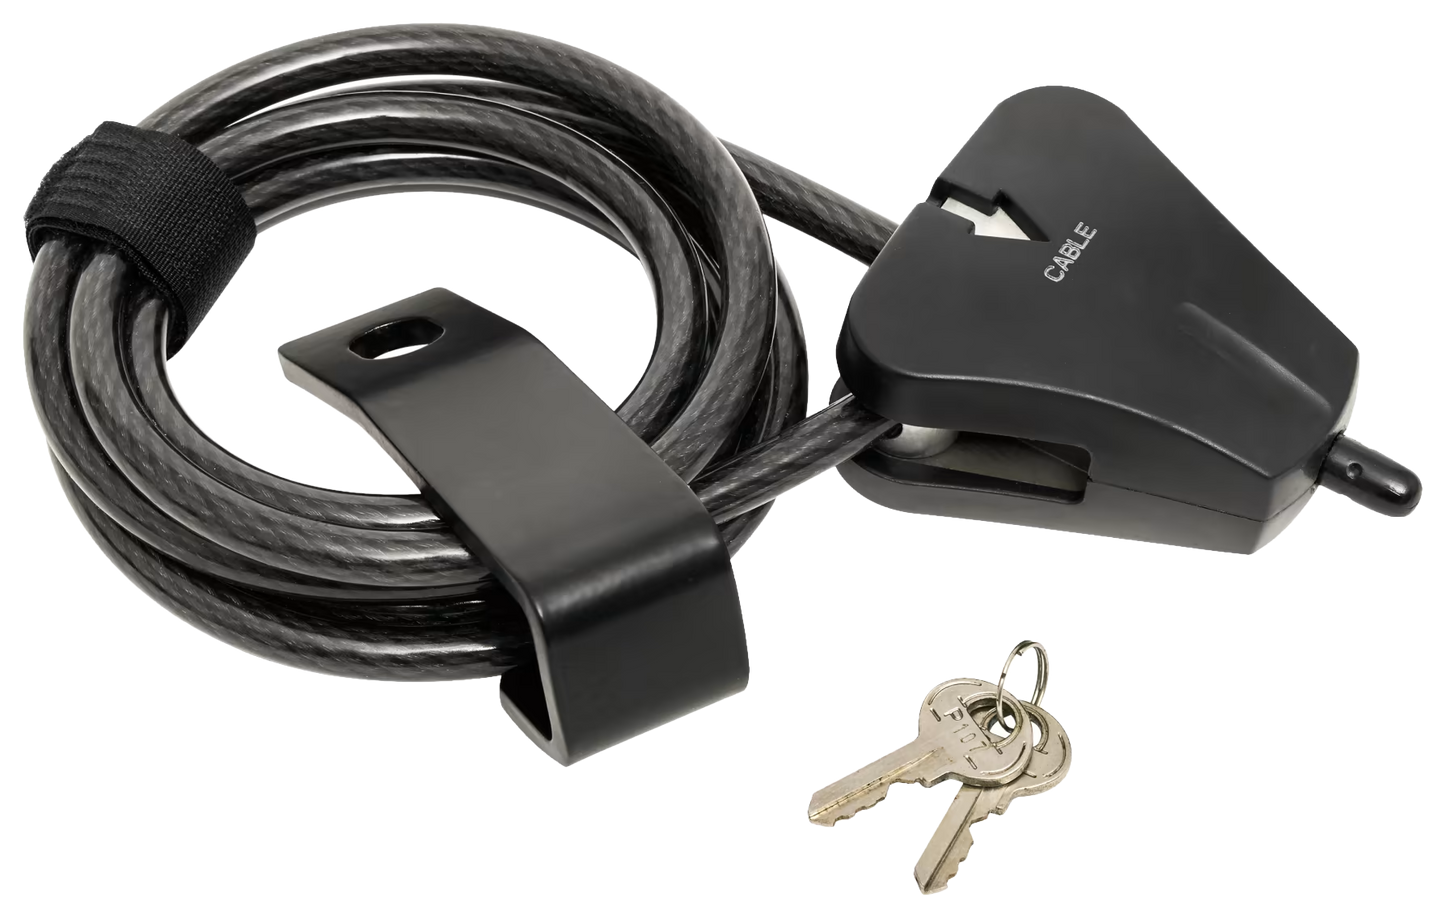 Yeti Security Cable Lock and Bracket